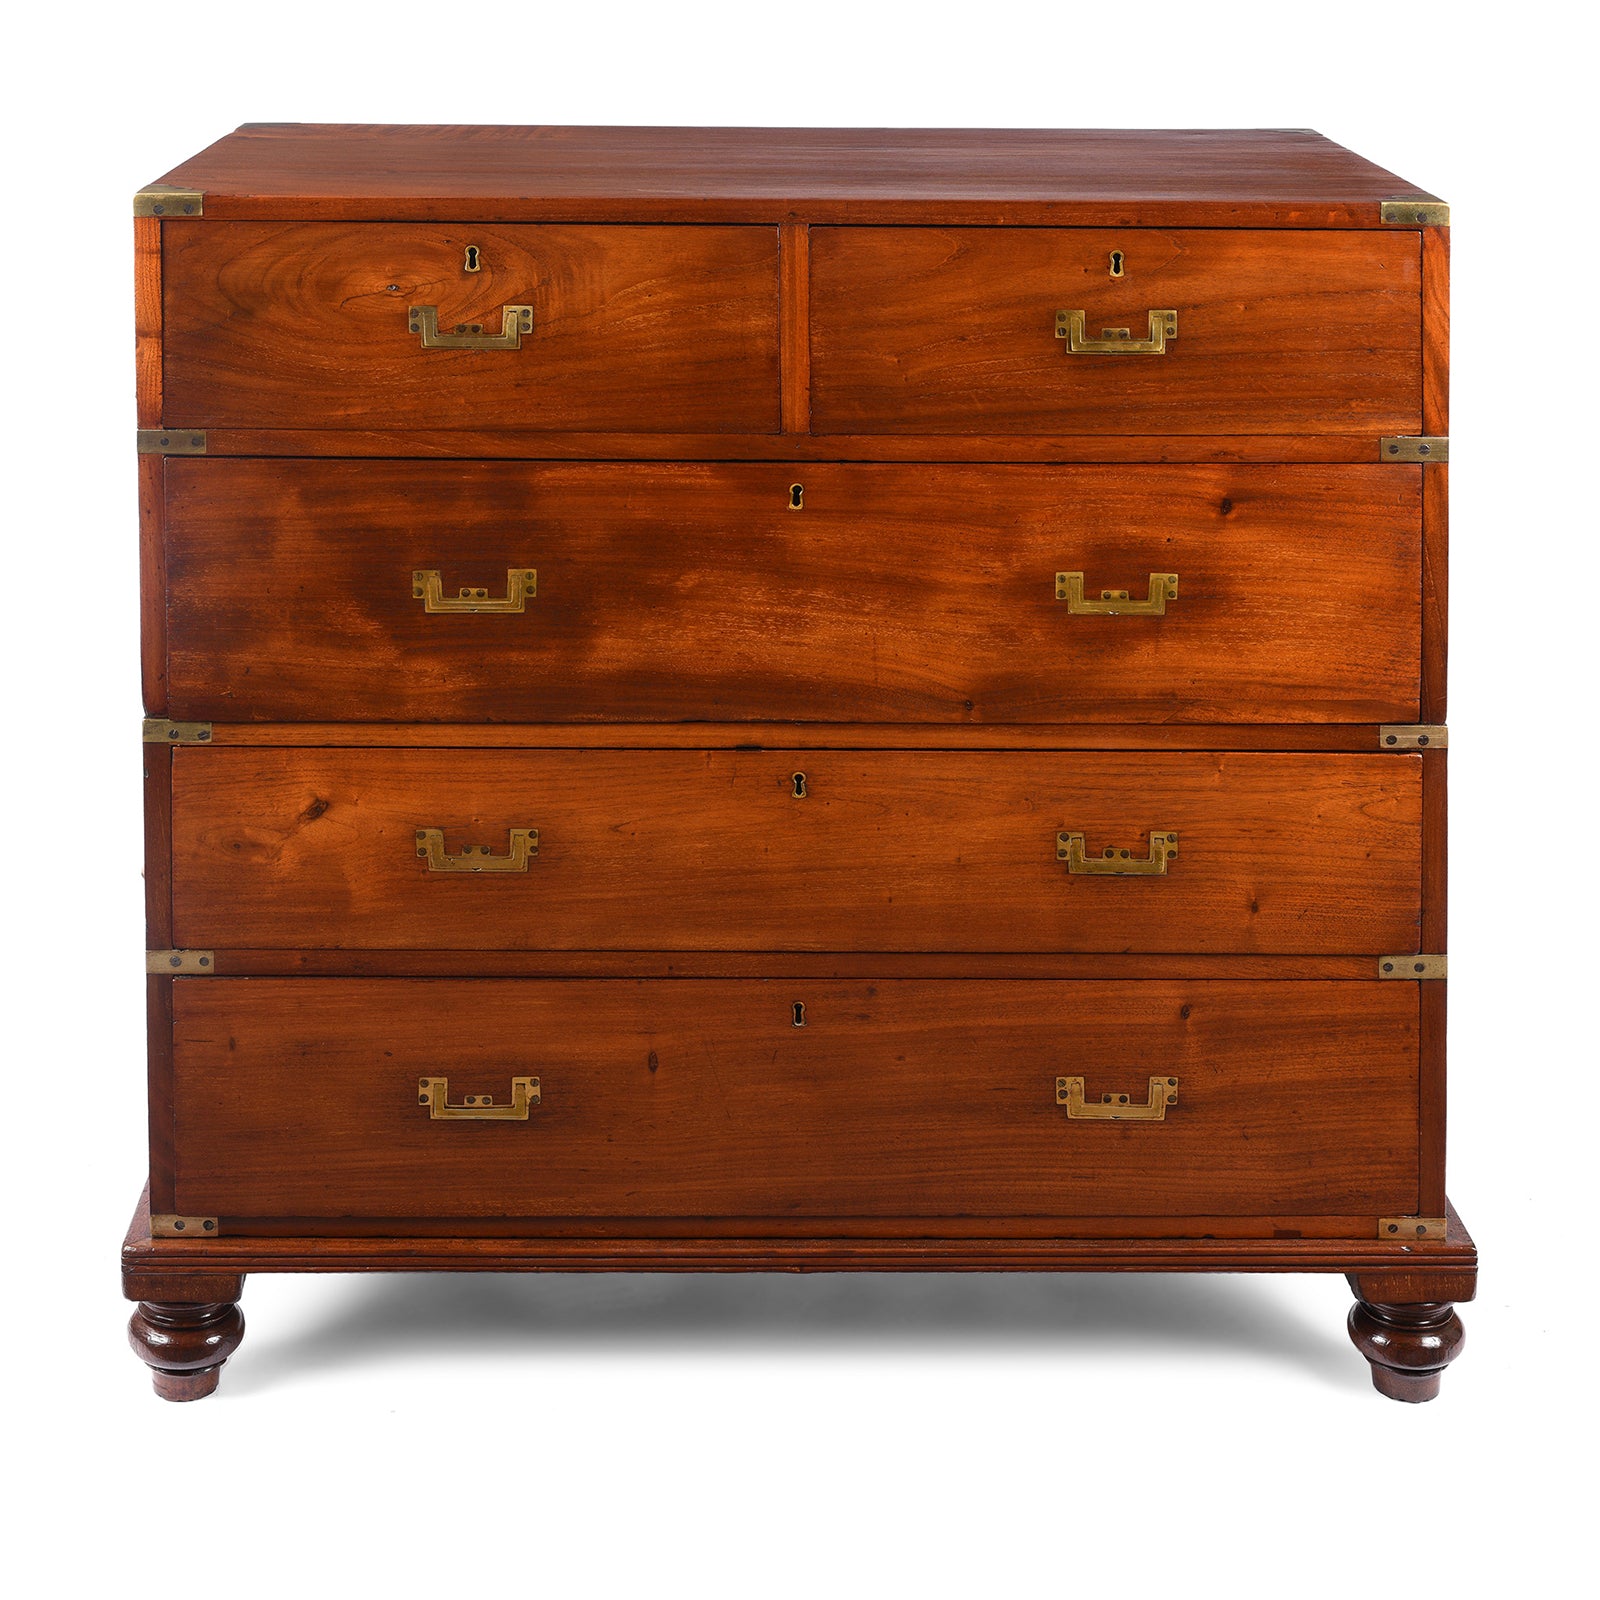 Antique Anglo Indian Mahogany Military Campaign Chest Of Drawers - 19th Century | Indigo Antiques